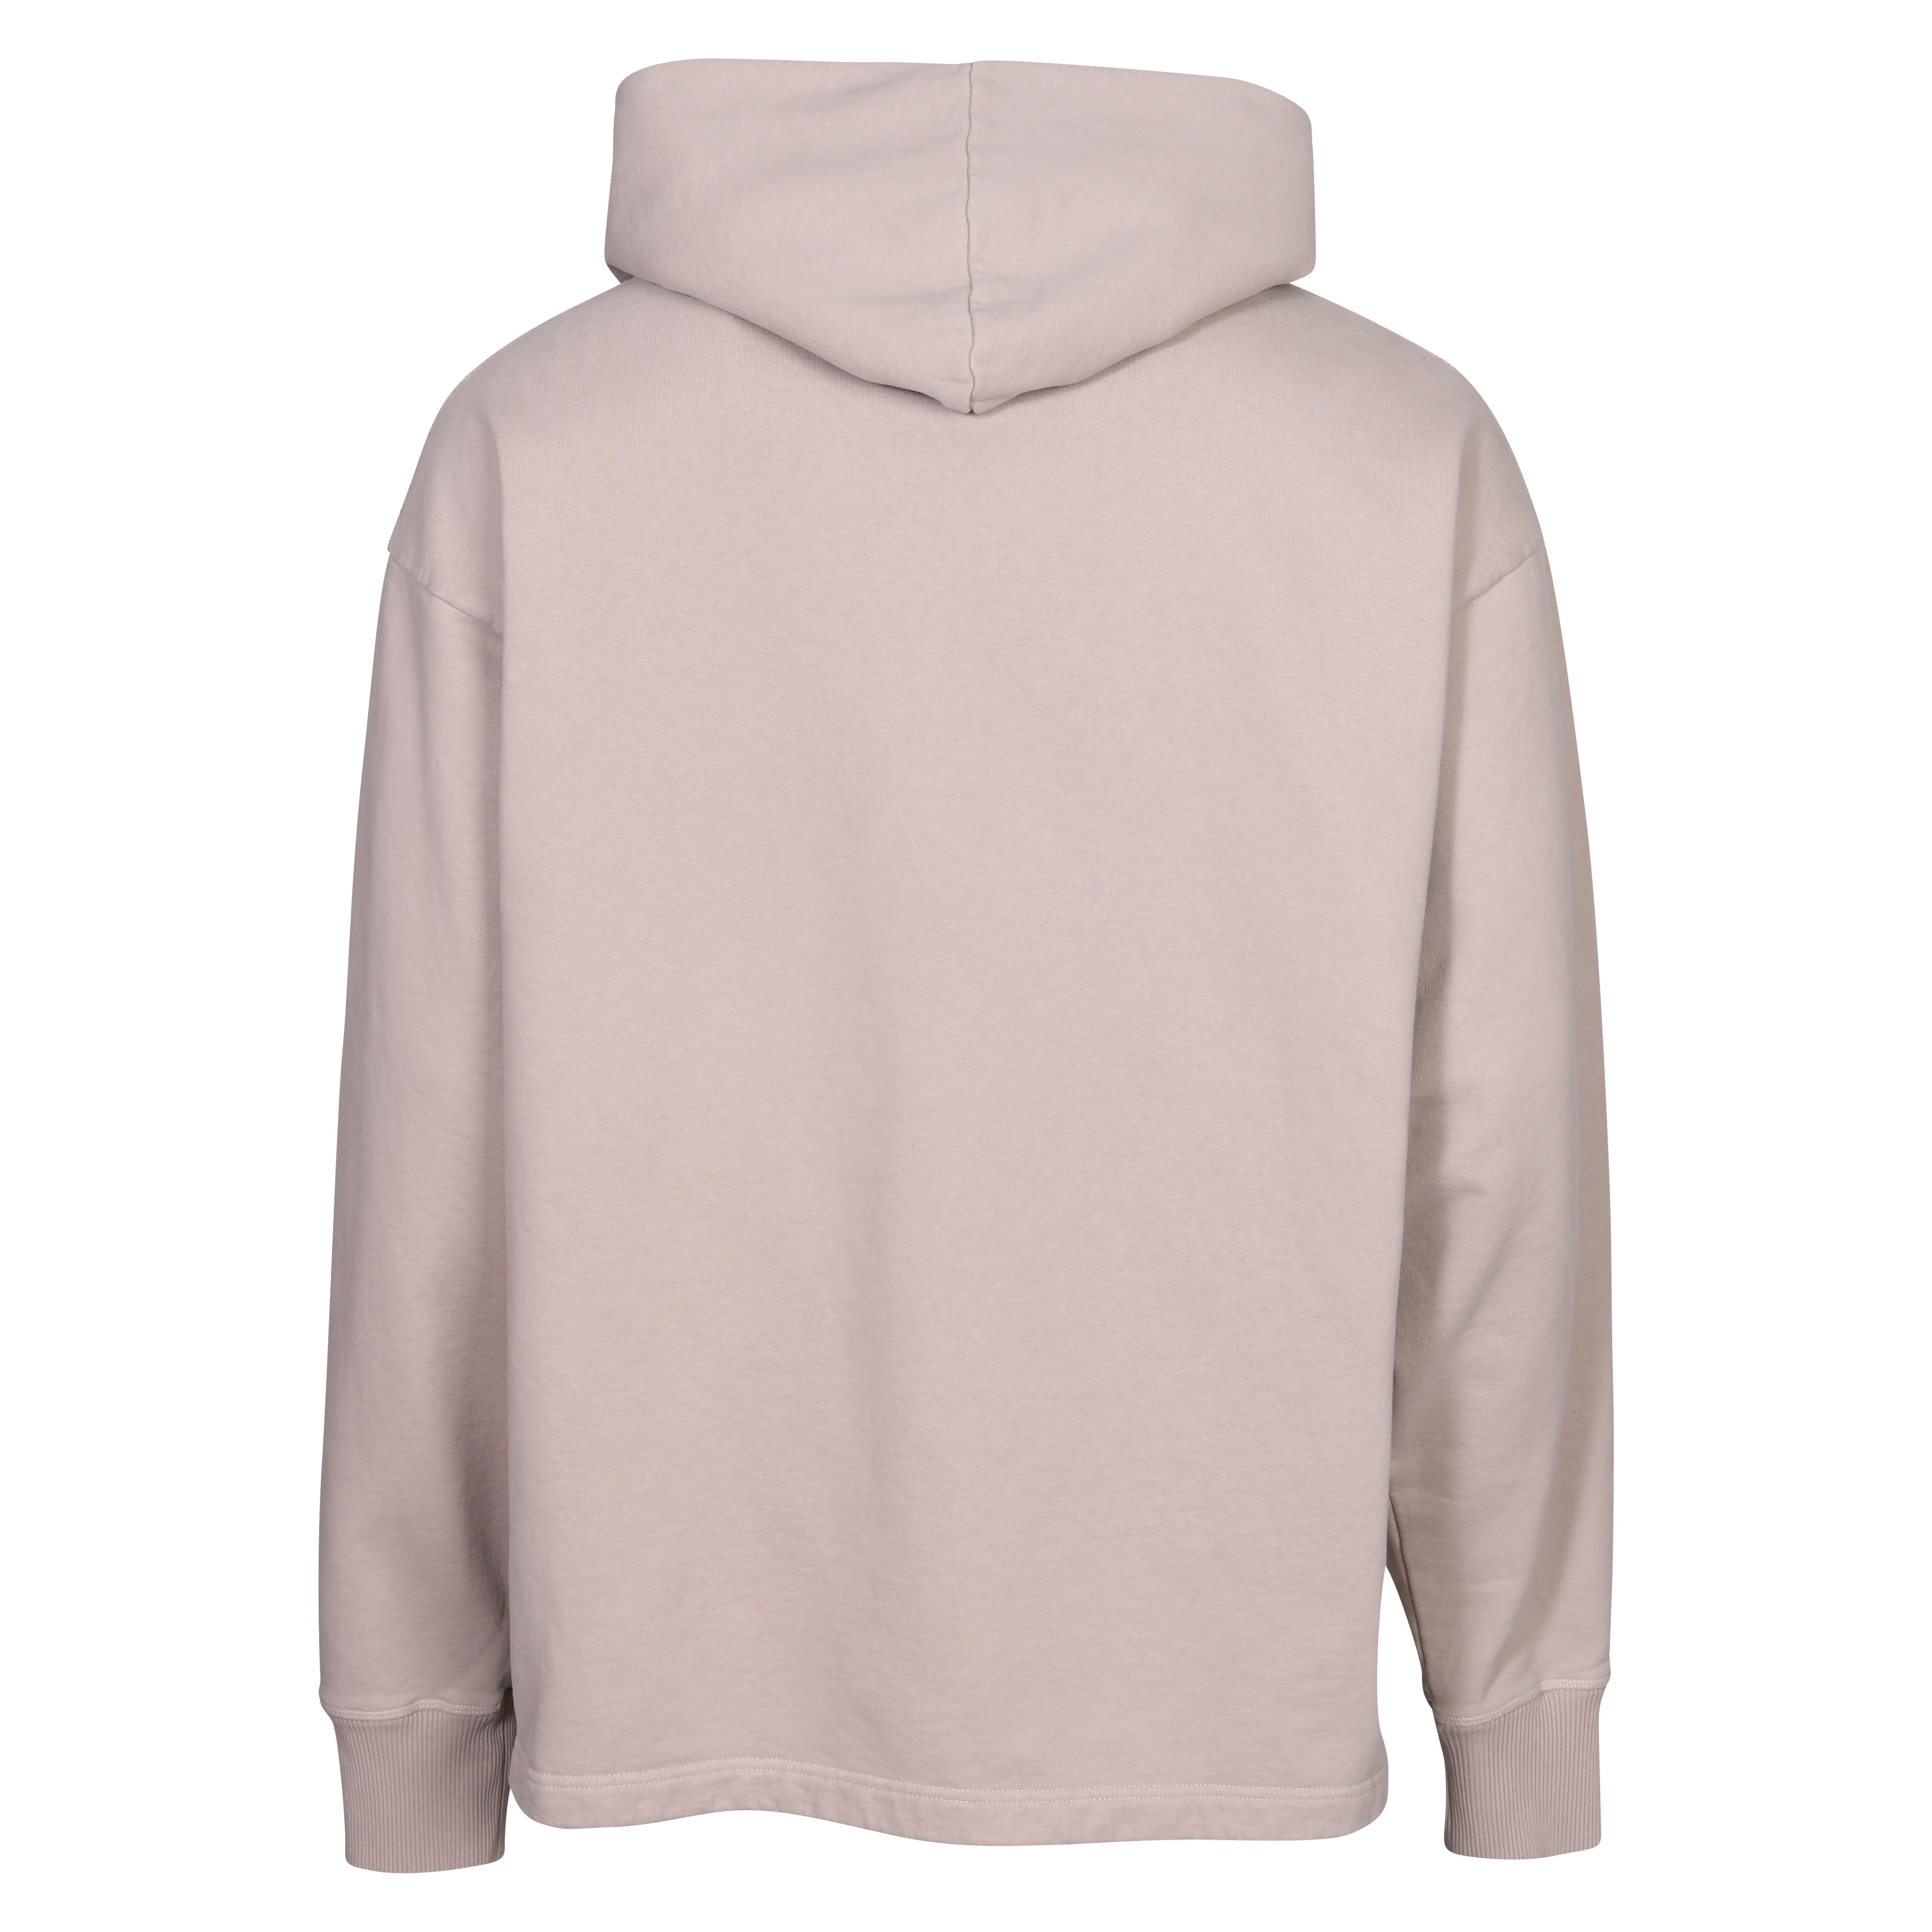 Acne Studios Stamp Hoodie in Oyster Grey XS